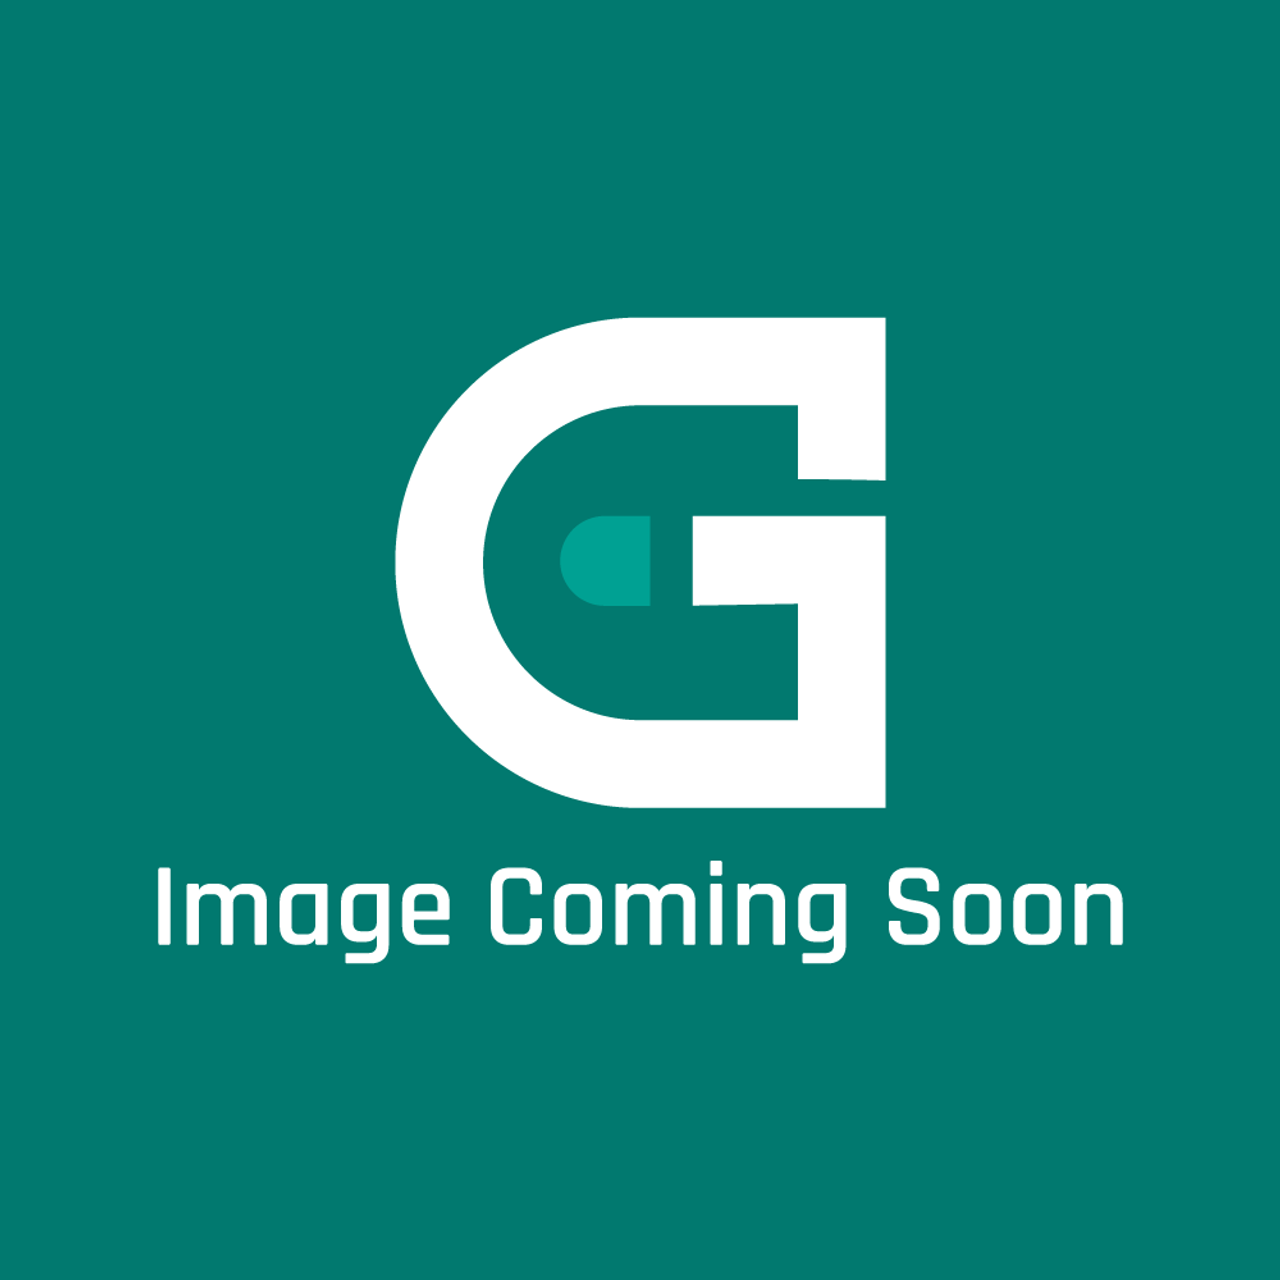 GE Appliances WB44K10034 - Asm Element Broil - Image Coming Soon!